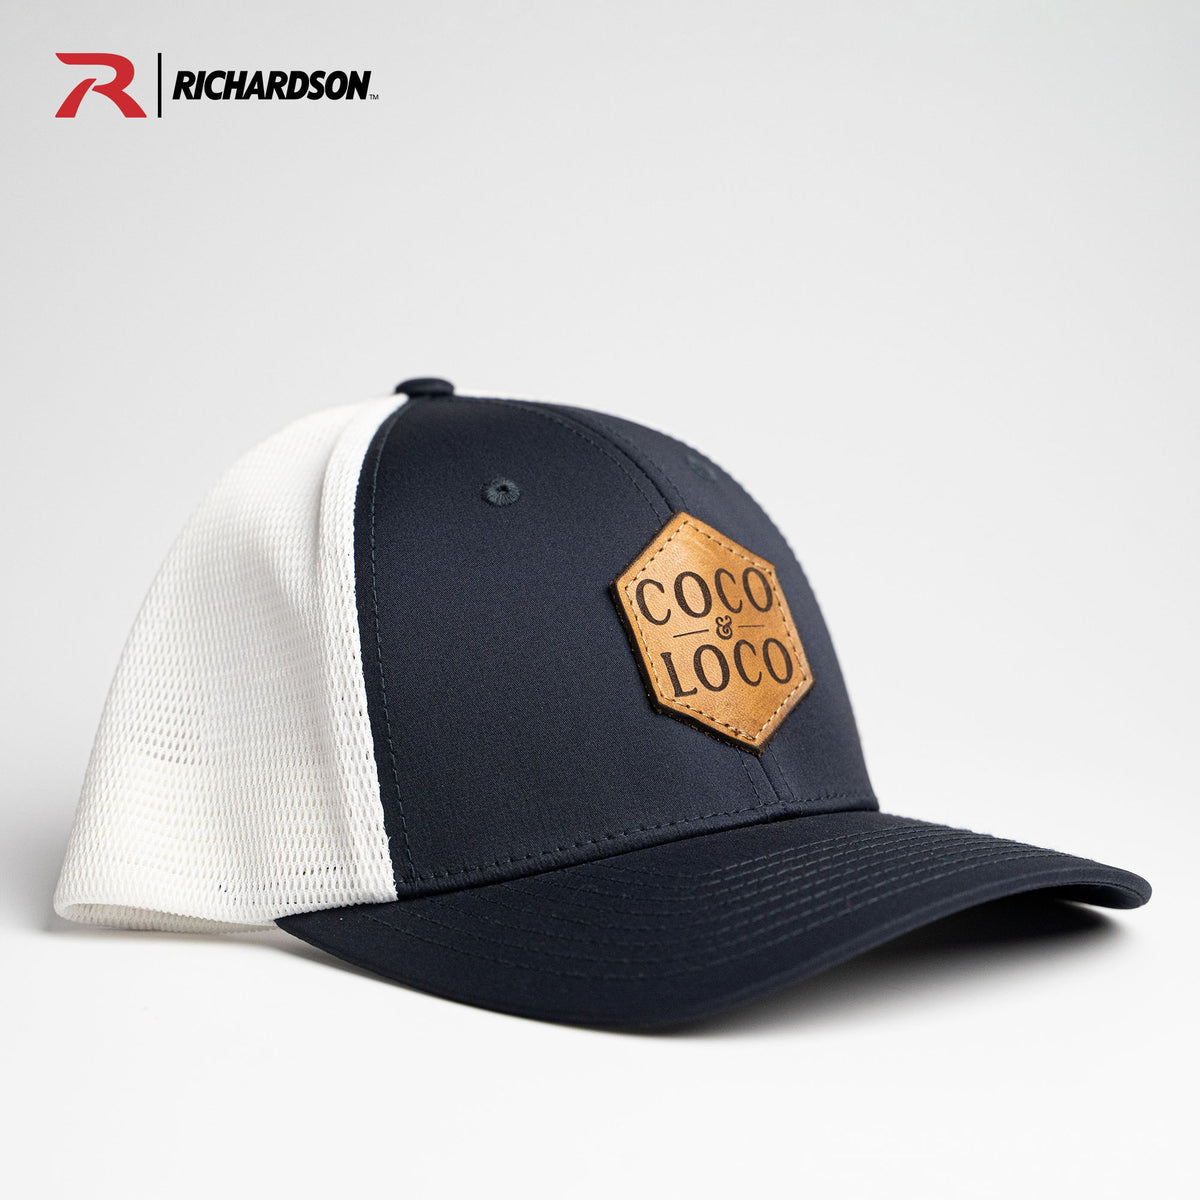 Richardson 174 Custom Performance Trucker Leather Patch Hat with YOUR LOGO